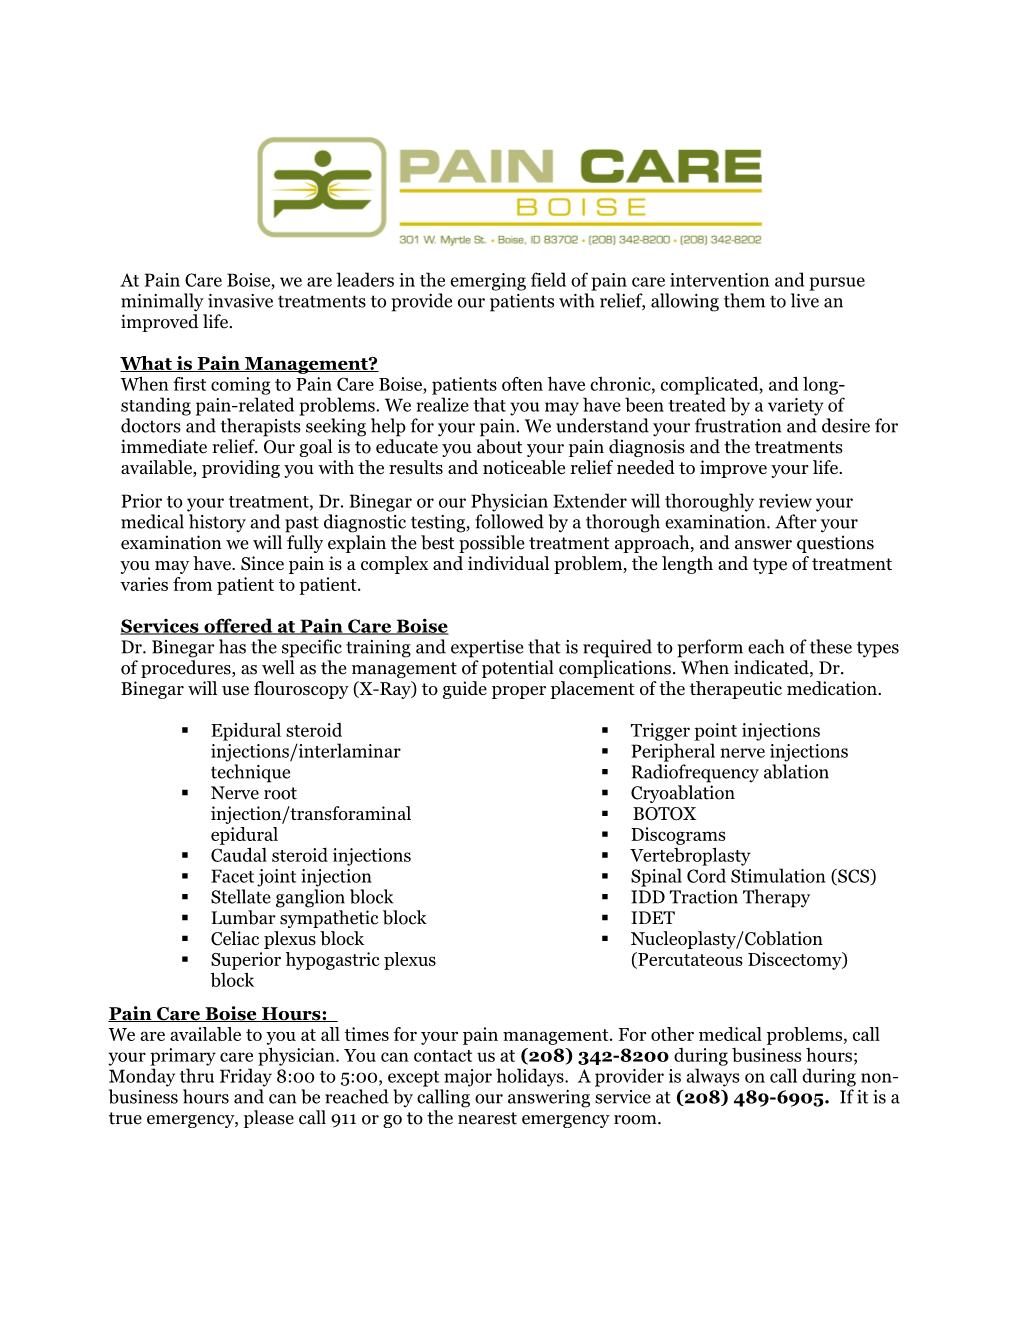 At Pain Care Boise We Are Leaders in the Emerging Field of Pain Care Intervention and Pursue